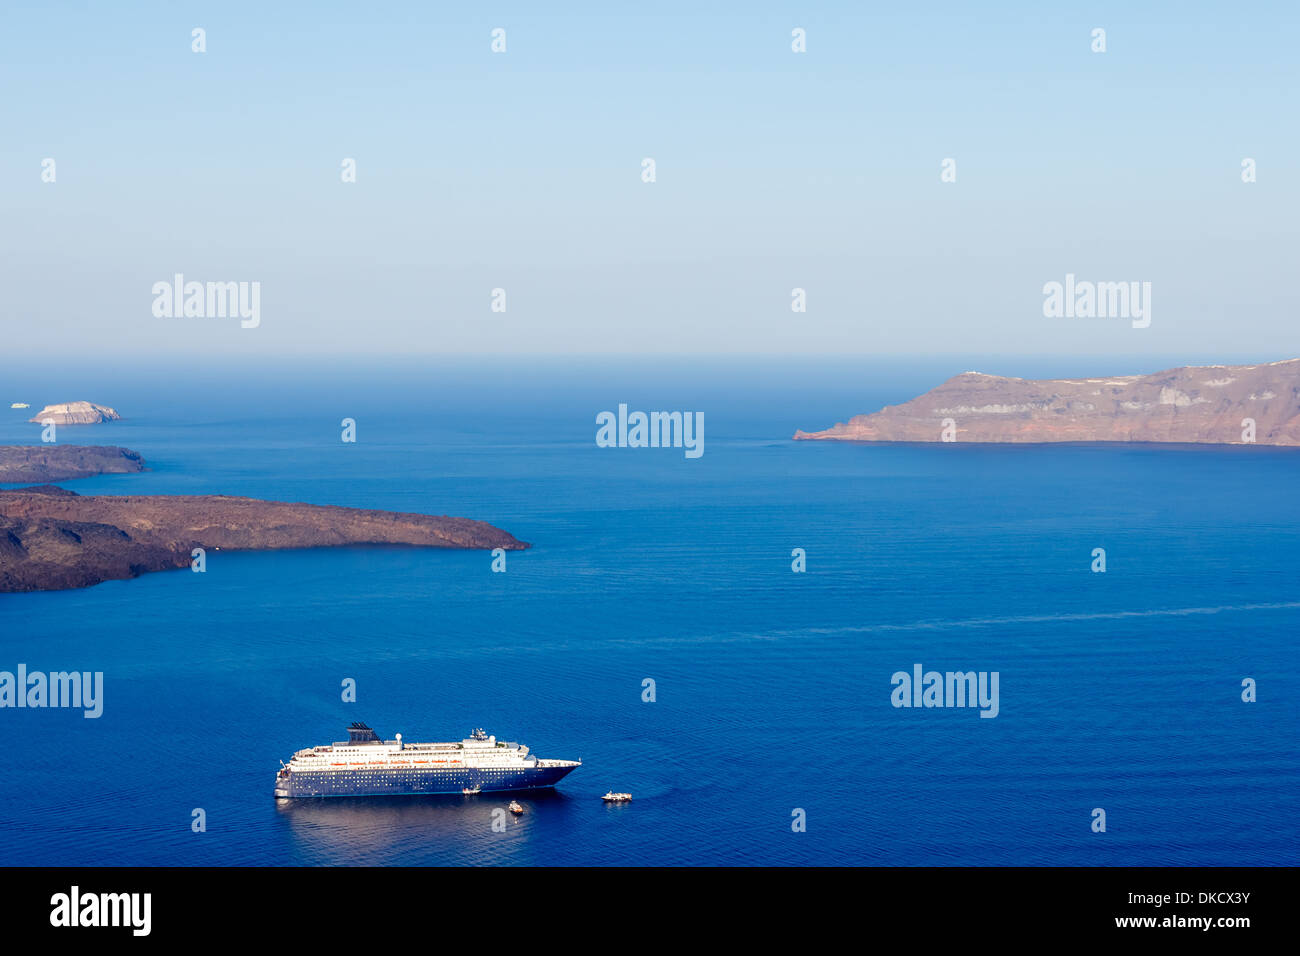 Nea Kameni volcanic island in Santorini Greece with ships in front photographed from a high point of view Stock Photo